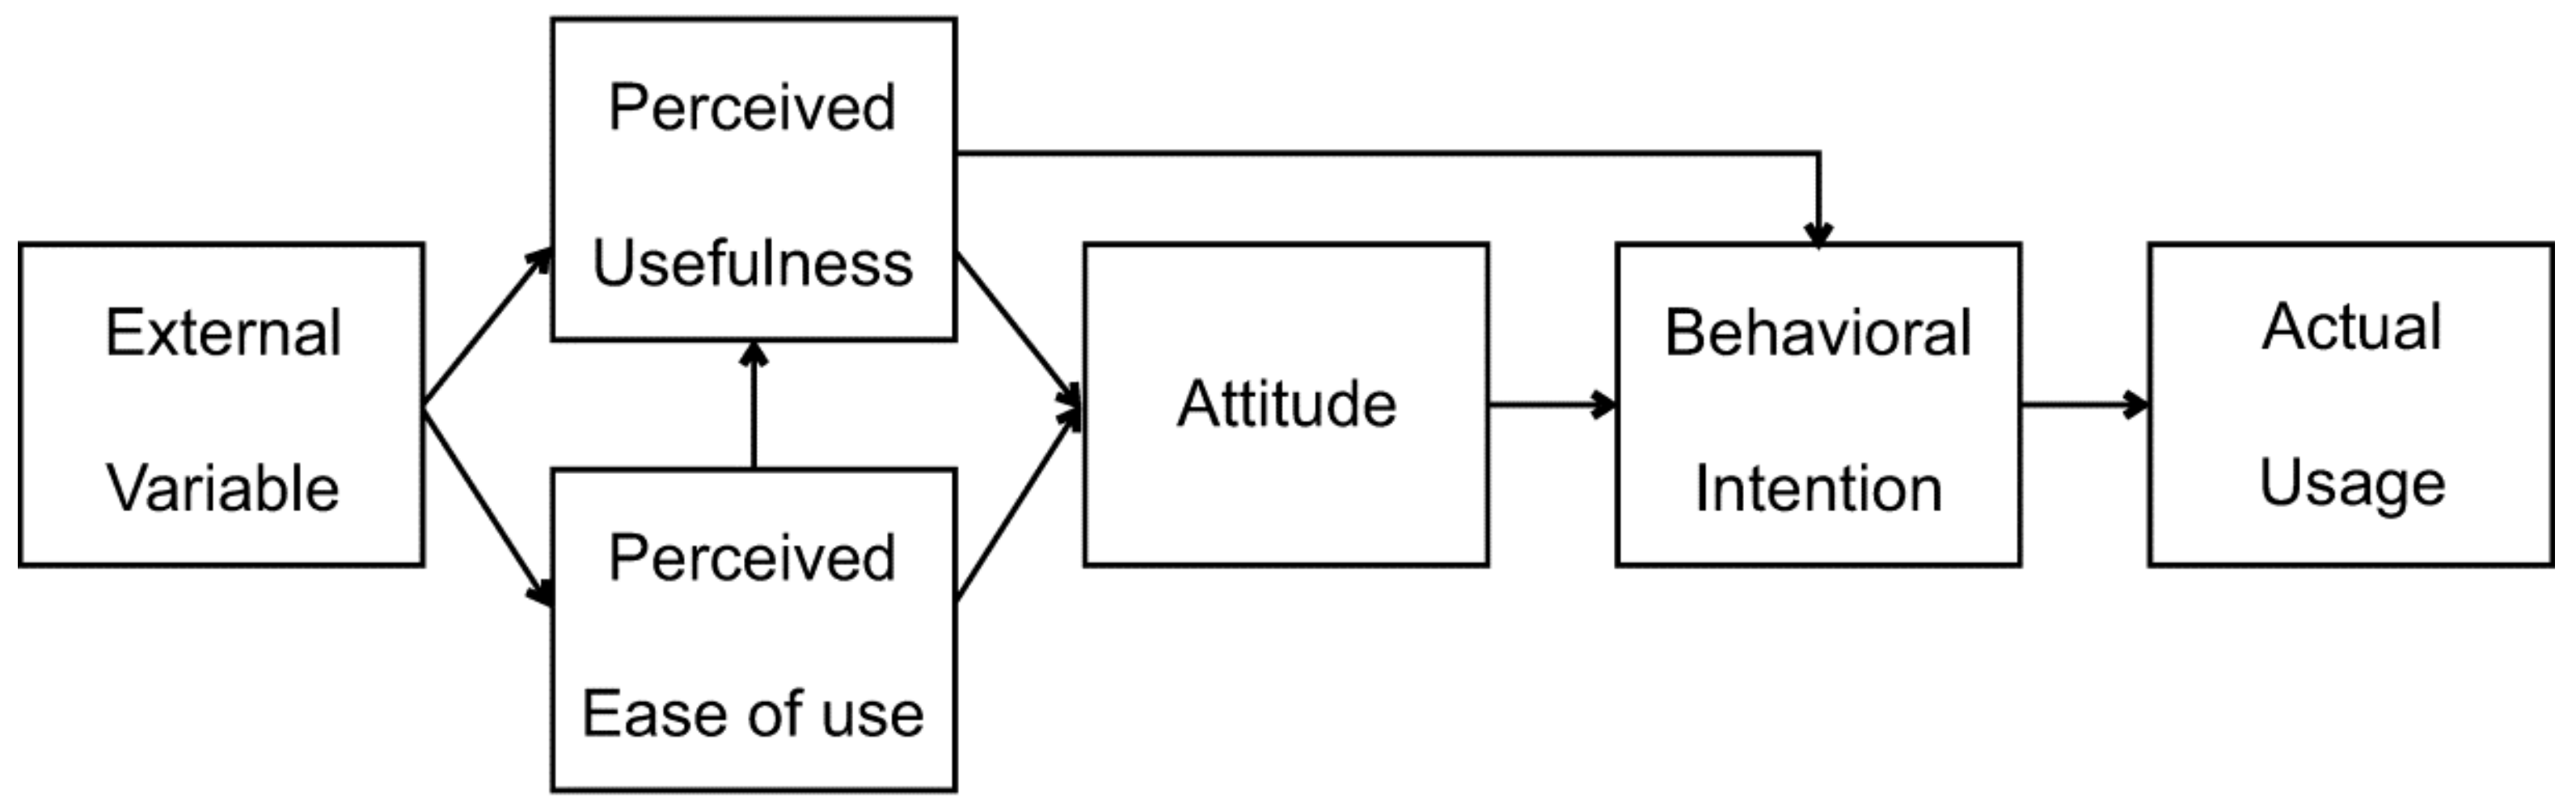 technology acceptance model example